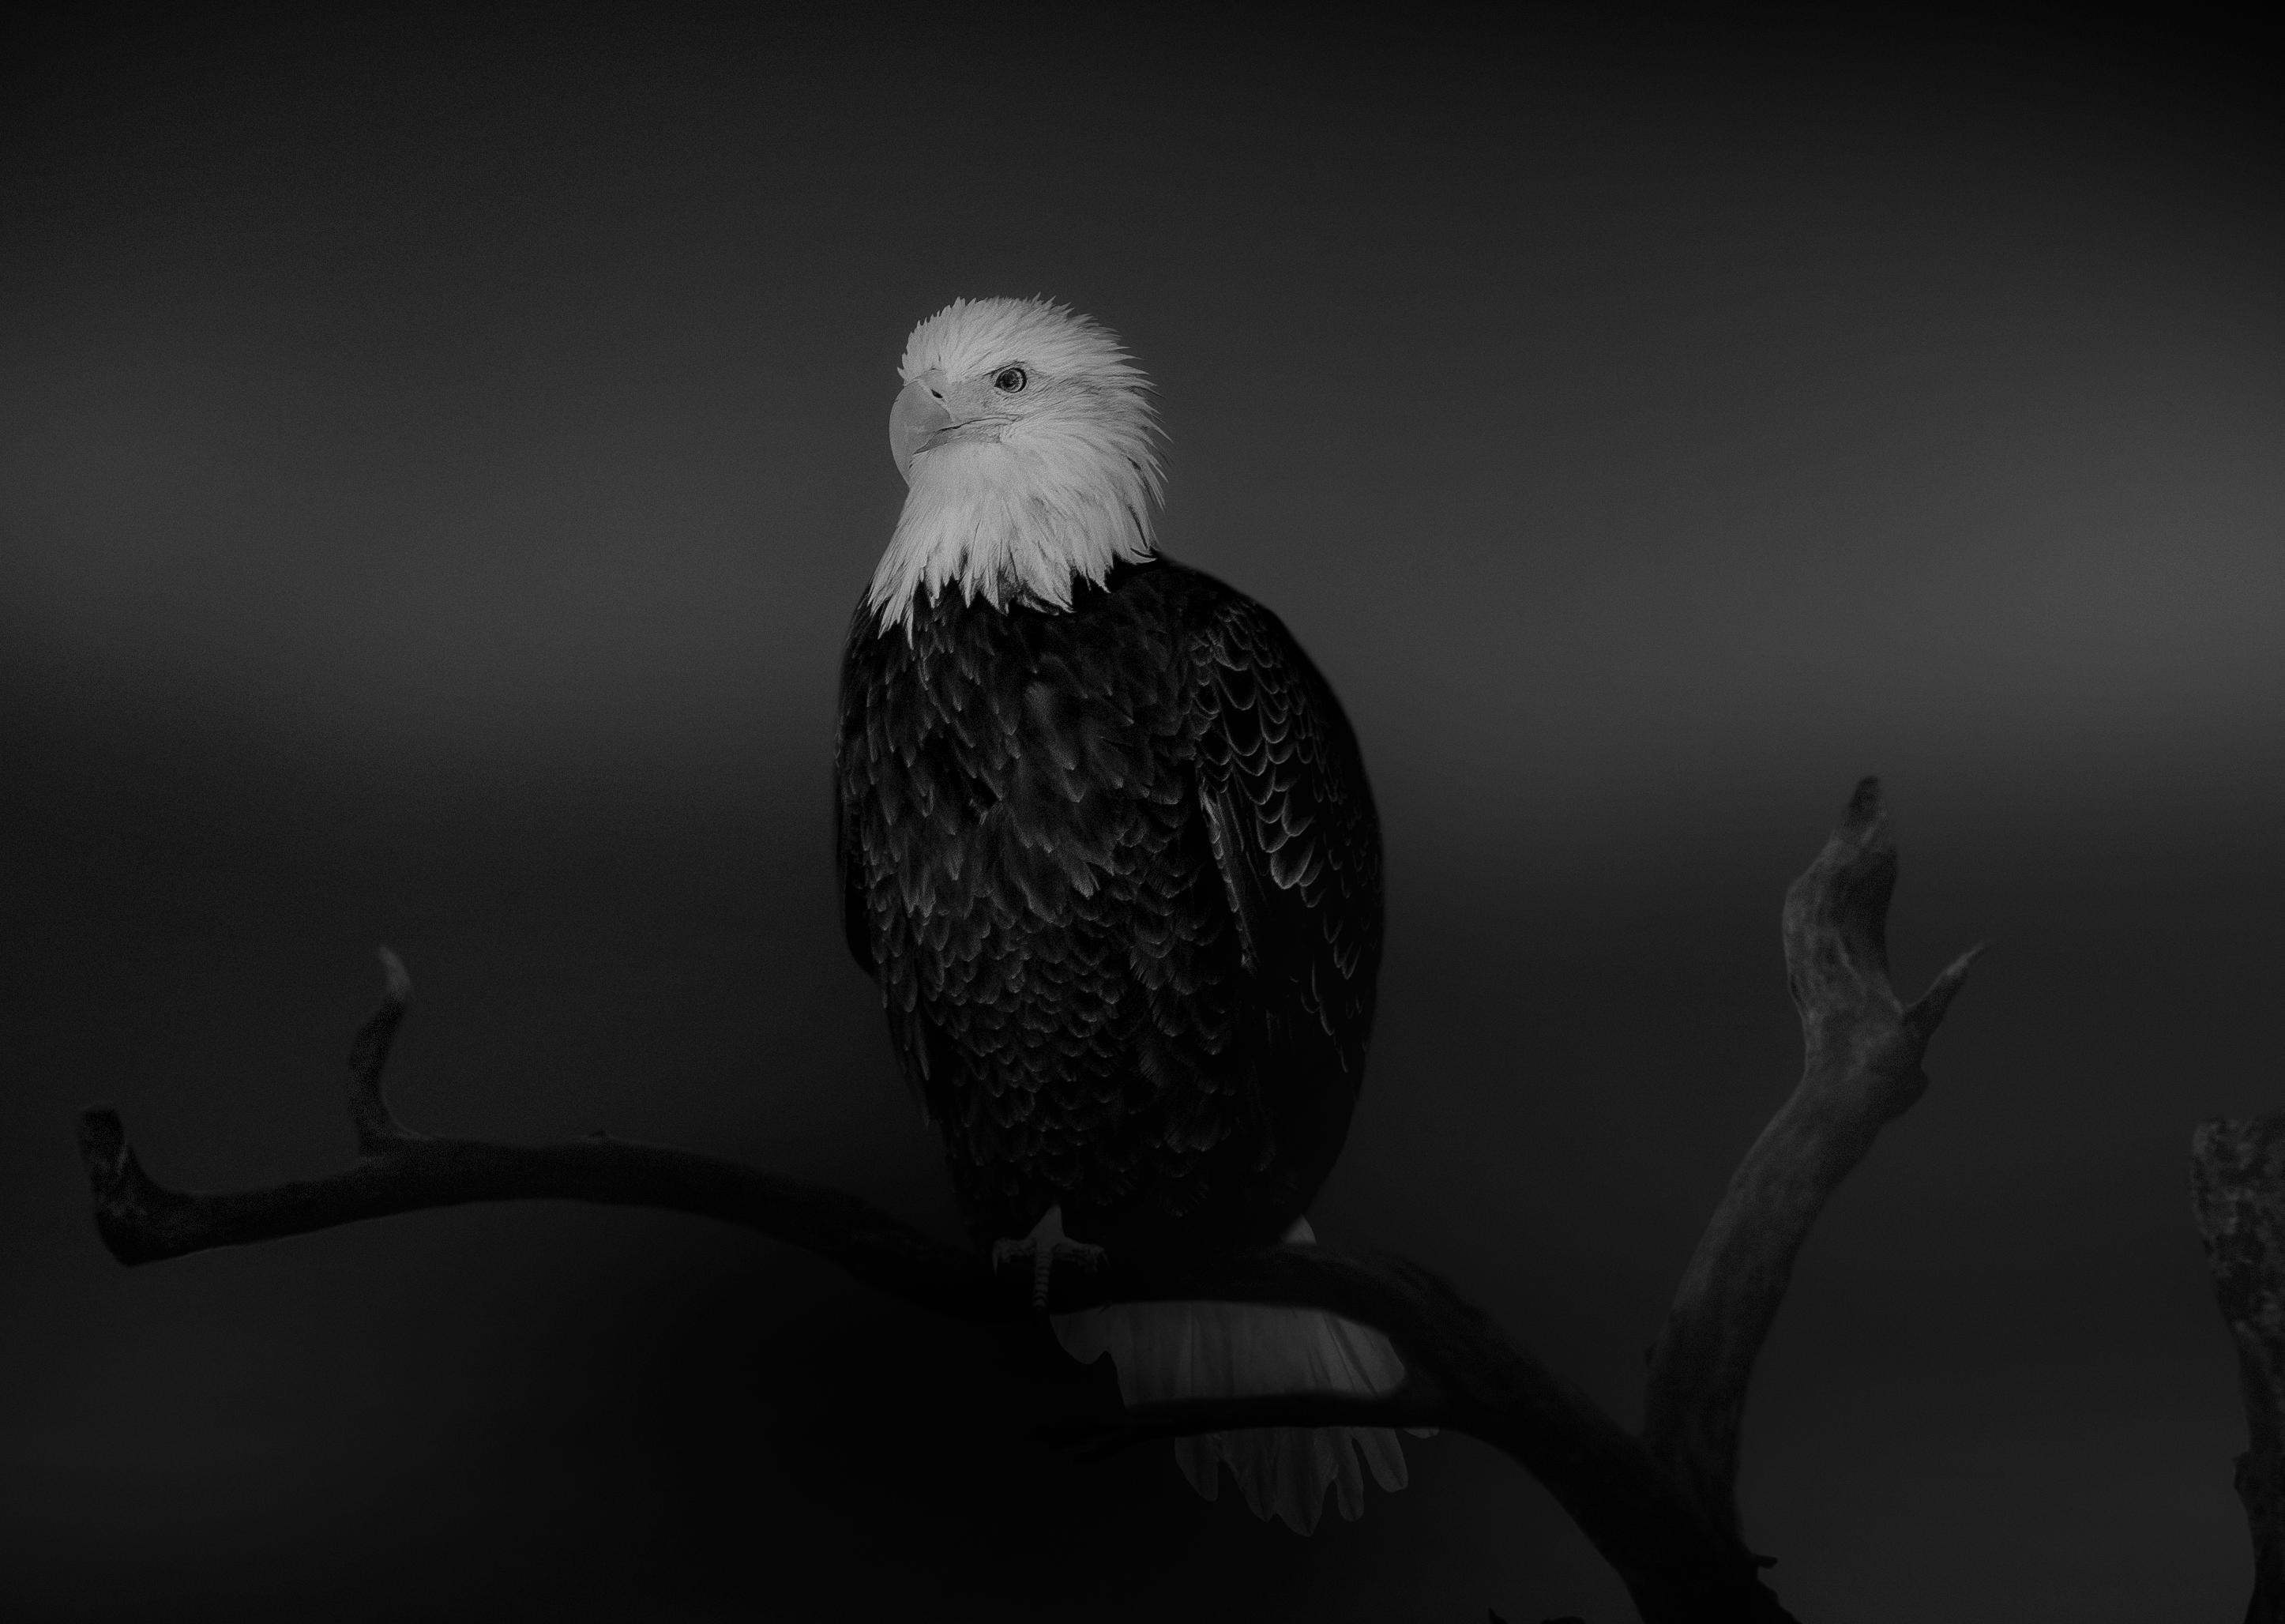 "Bald Eagle" 36x48 - Black & White Photography, Photograph by Shane Russeck